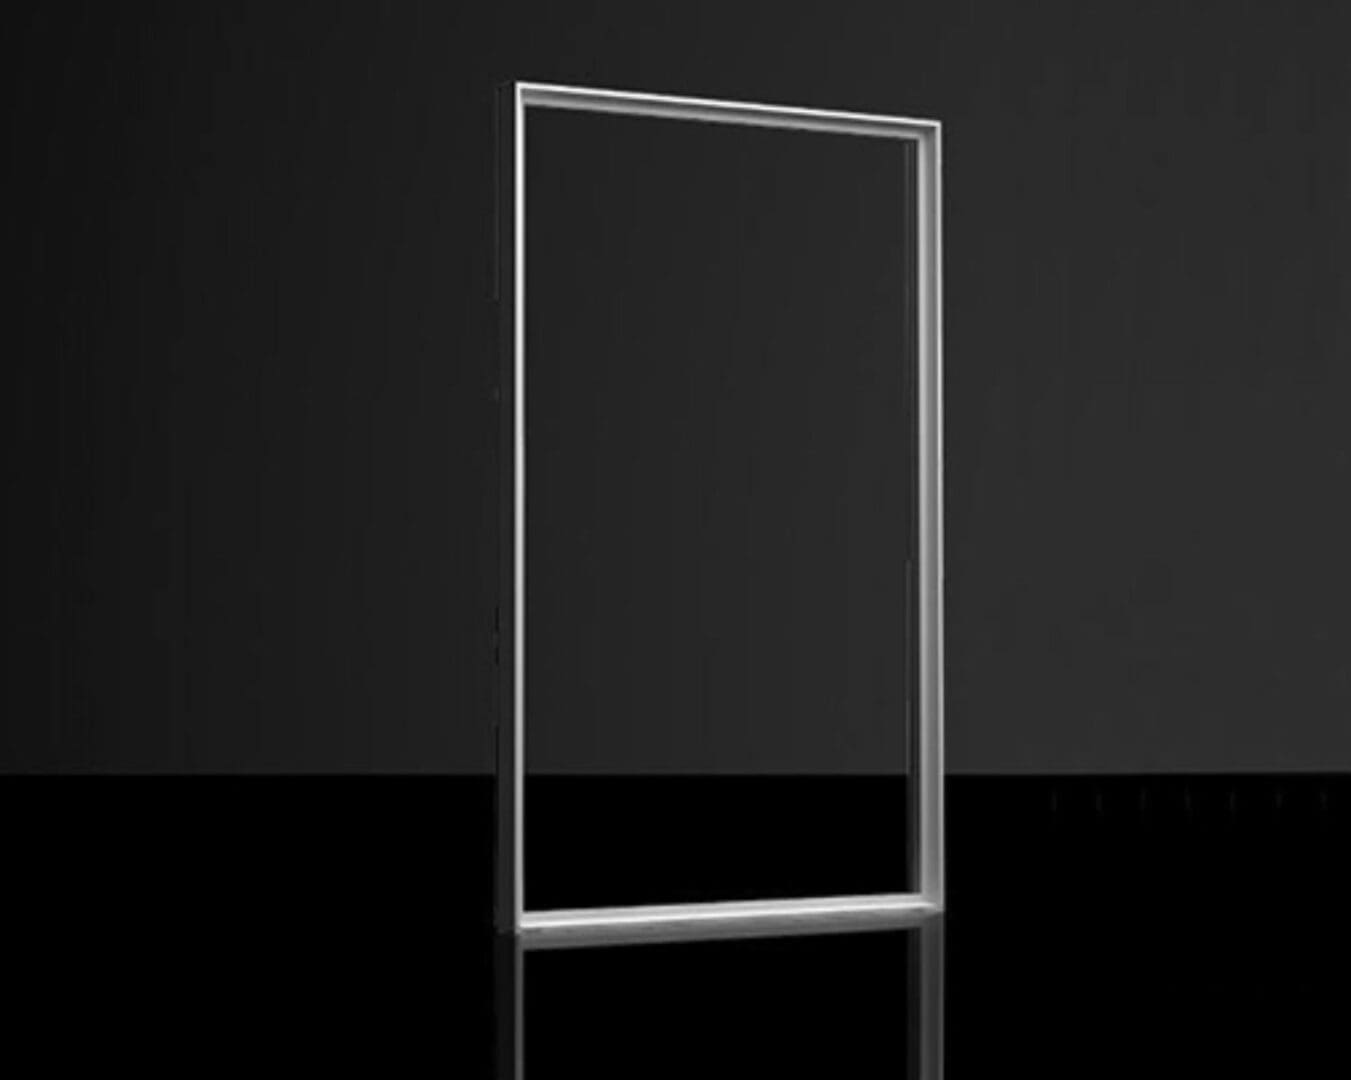 A glass frame on the floor in front of a black wall.